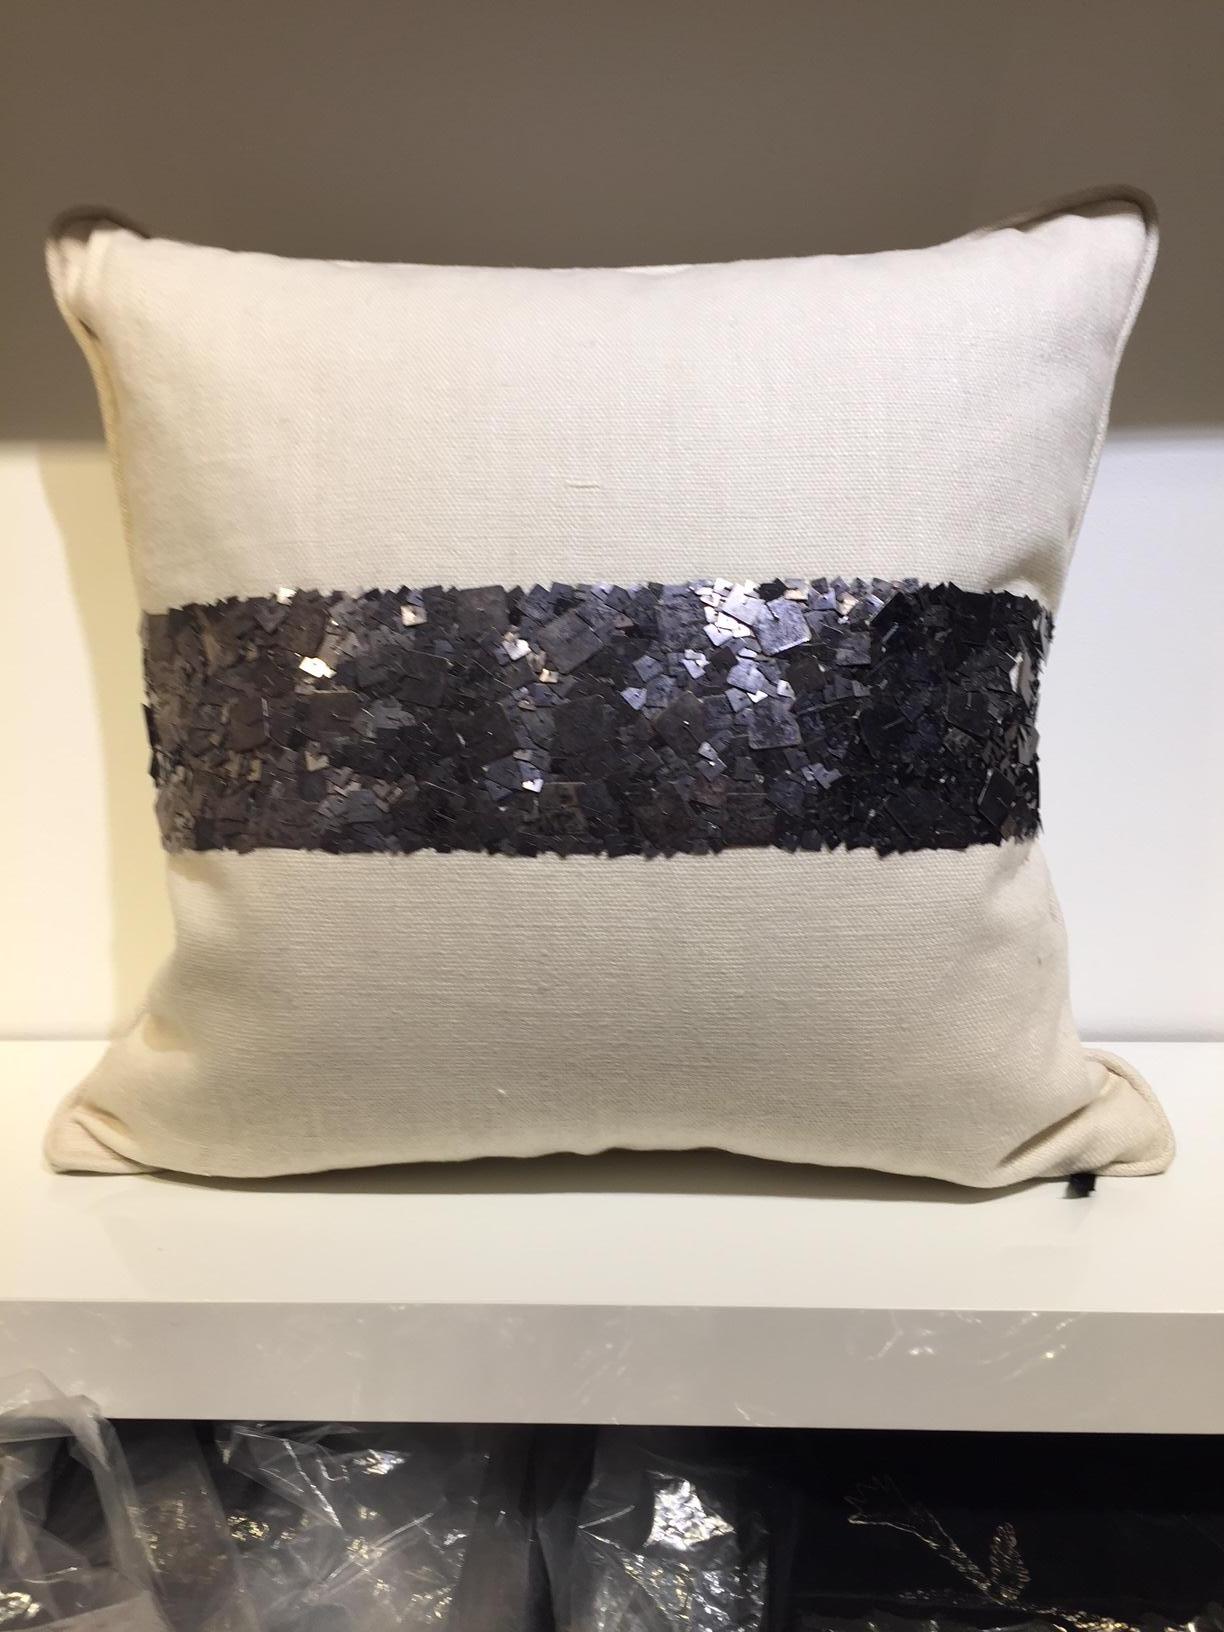 Pair of cushions, size 50x50cm, hand embroidered with metal sequins col. Dark silver, base fabric handwoven linen col. Off-white, cushion cover with cotton lining, self piped, concealed zip, inner pad 100% new goose feathers.